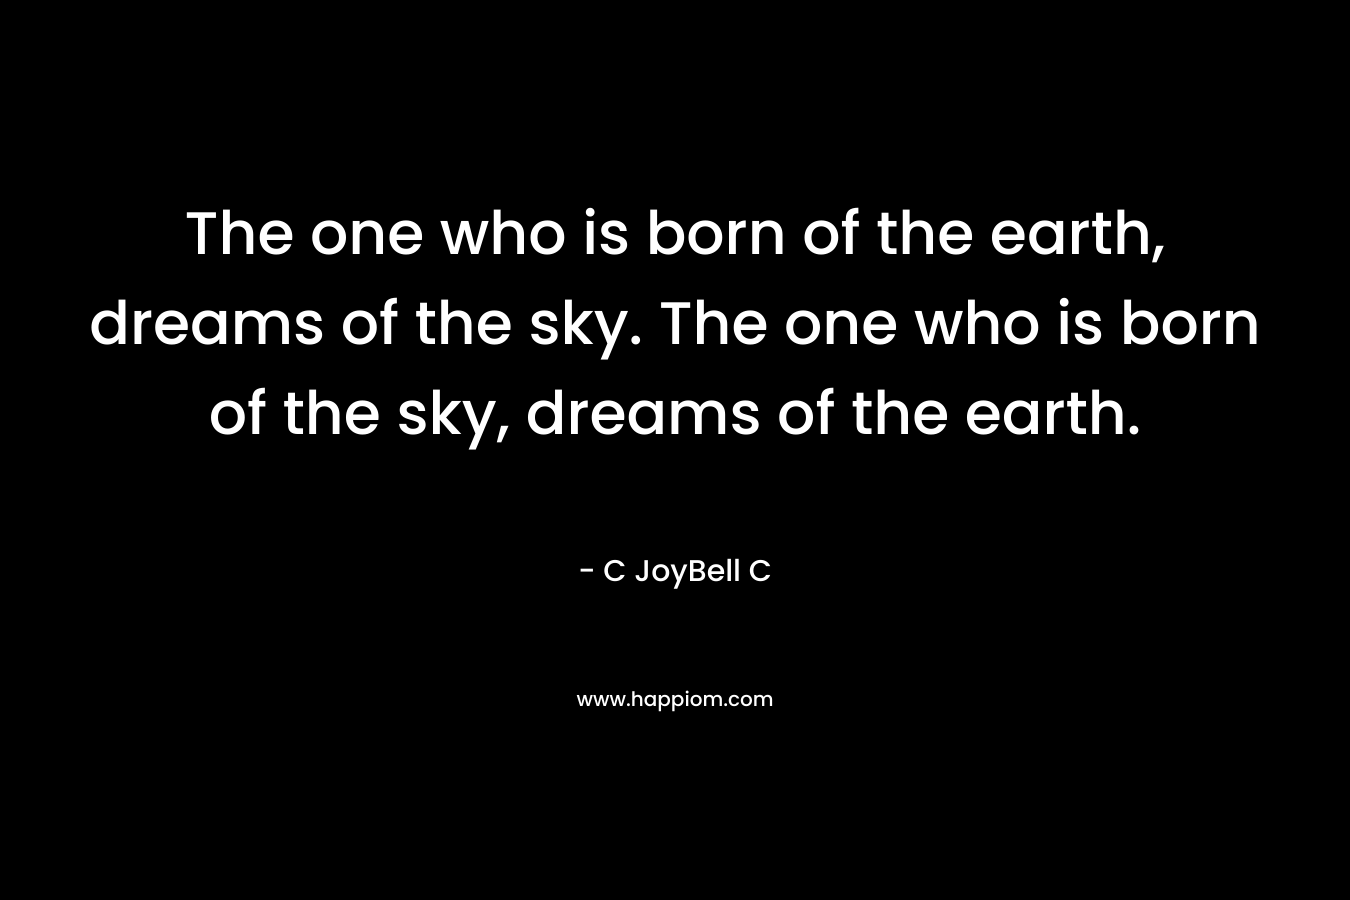 The one who is born of the earth, dreams of the sky. The one who is born of the sky, dreams of the earth. – C JoyBell C